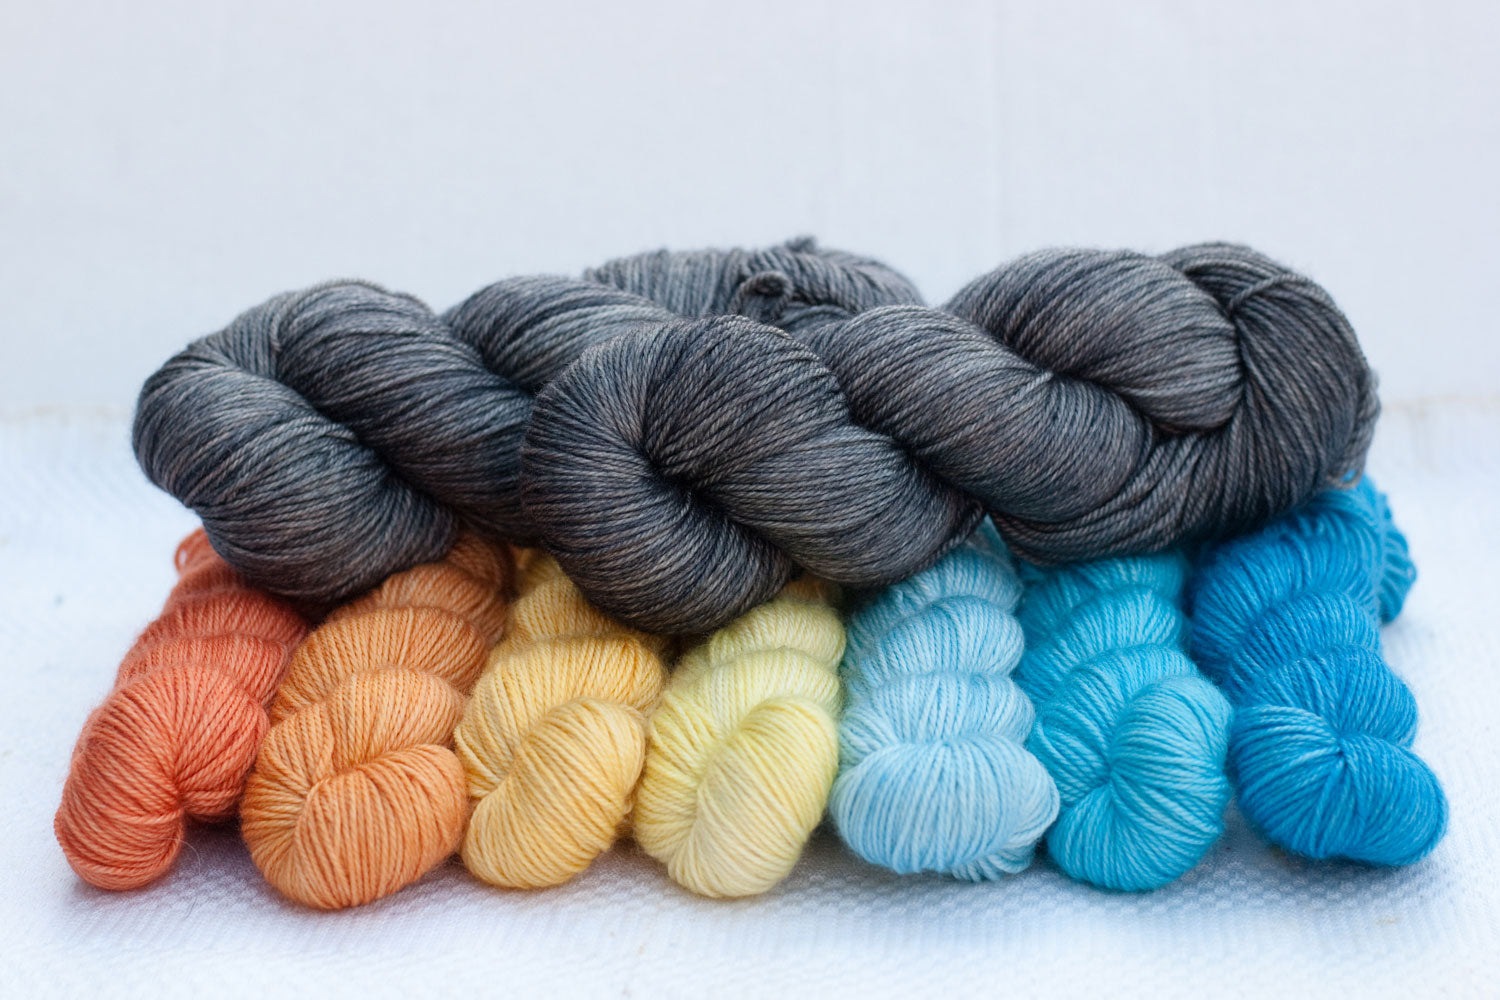 2 full skeins of medium grey yarn contrasted with gradient set of oranges, yellows, and blues